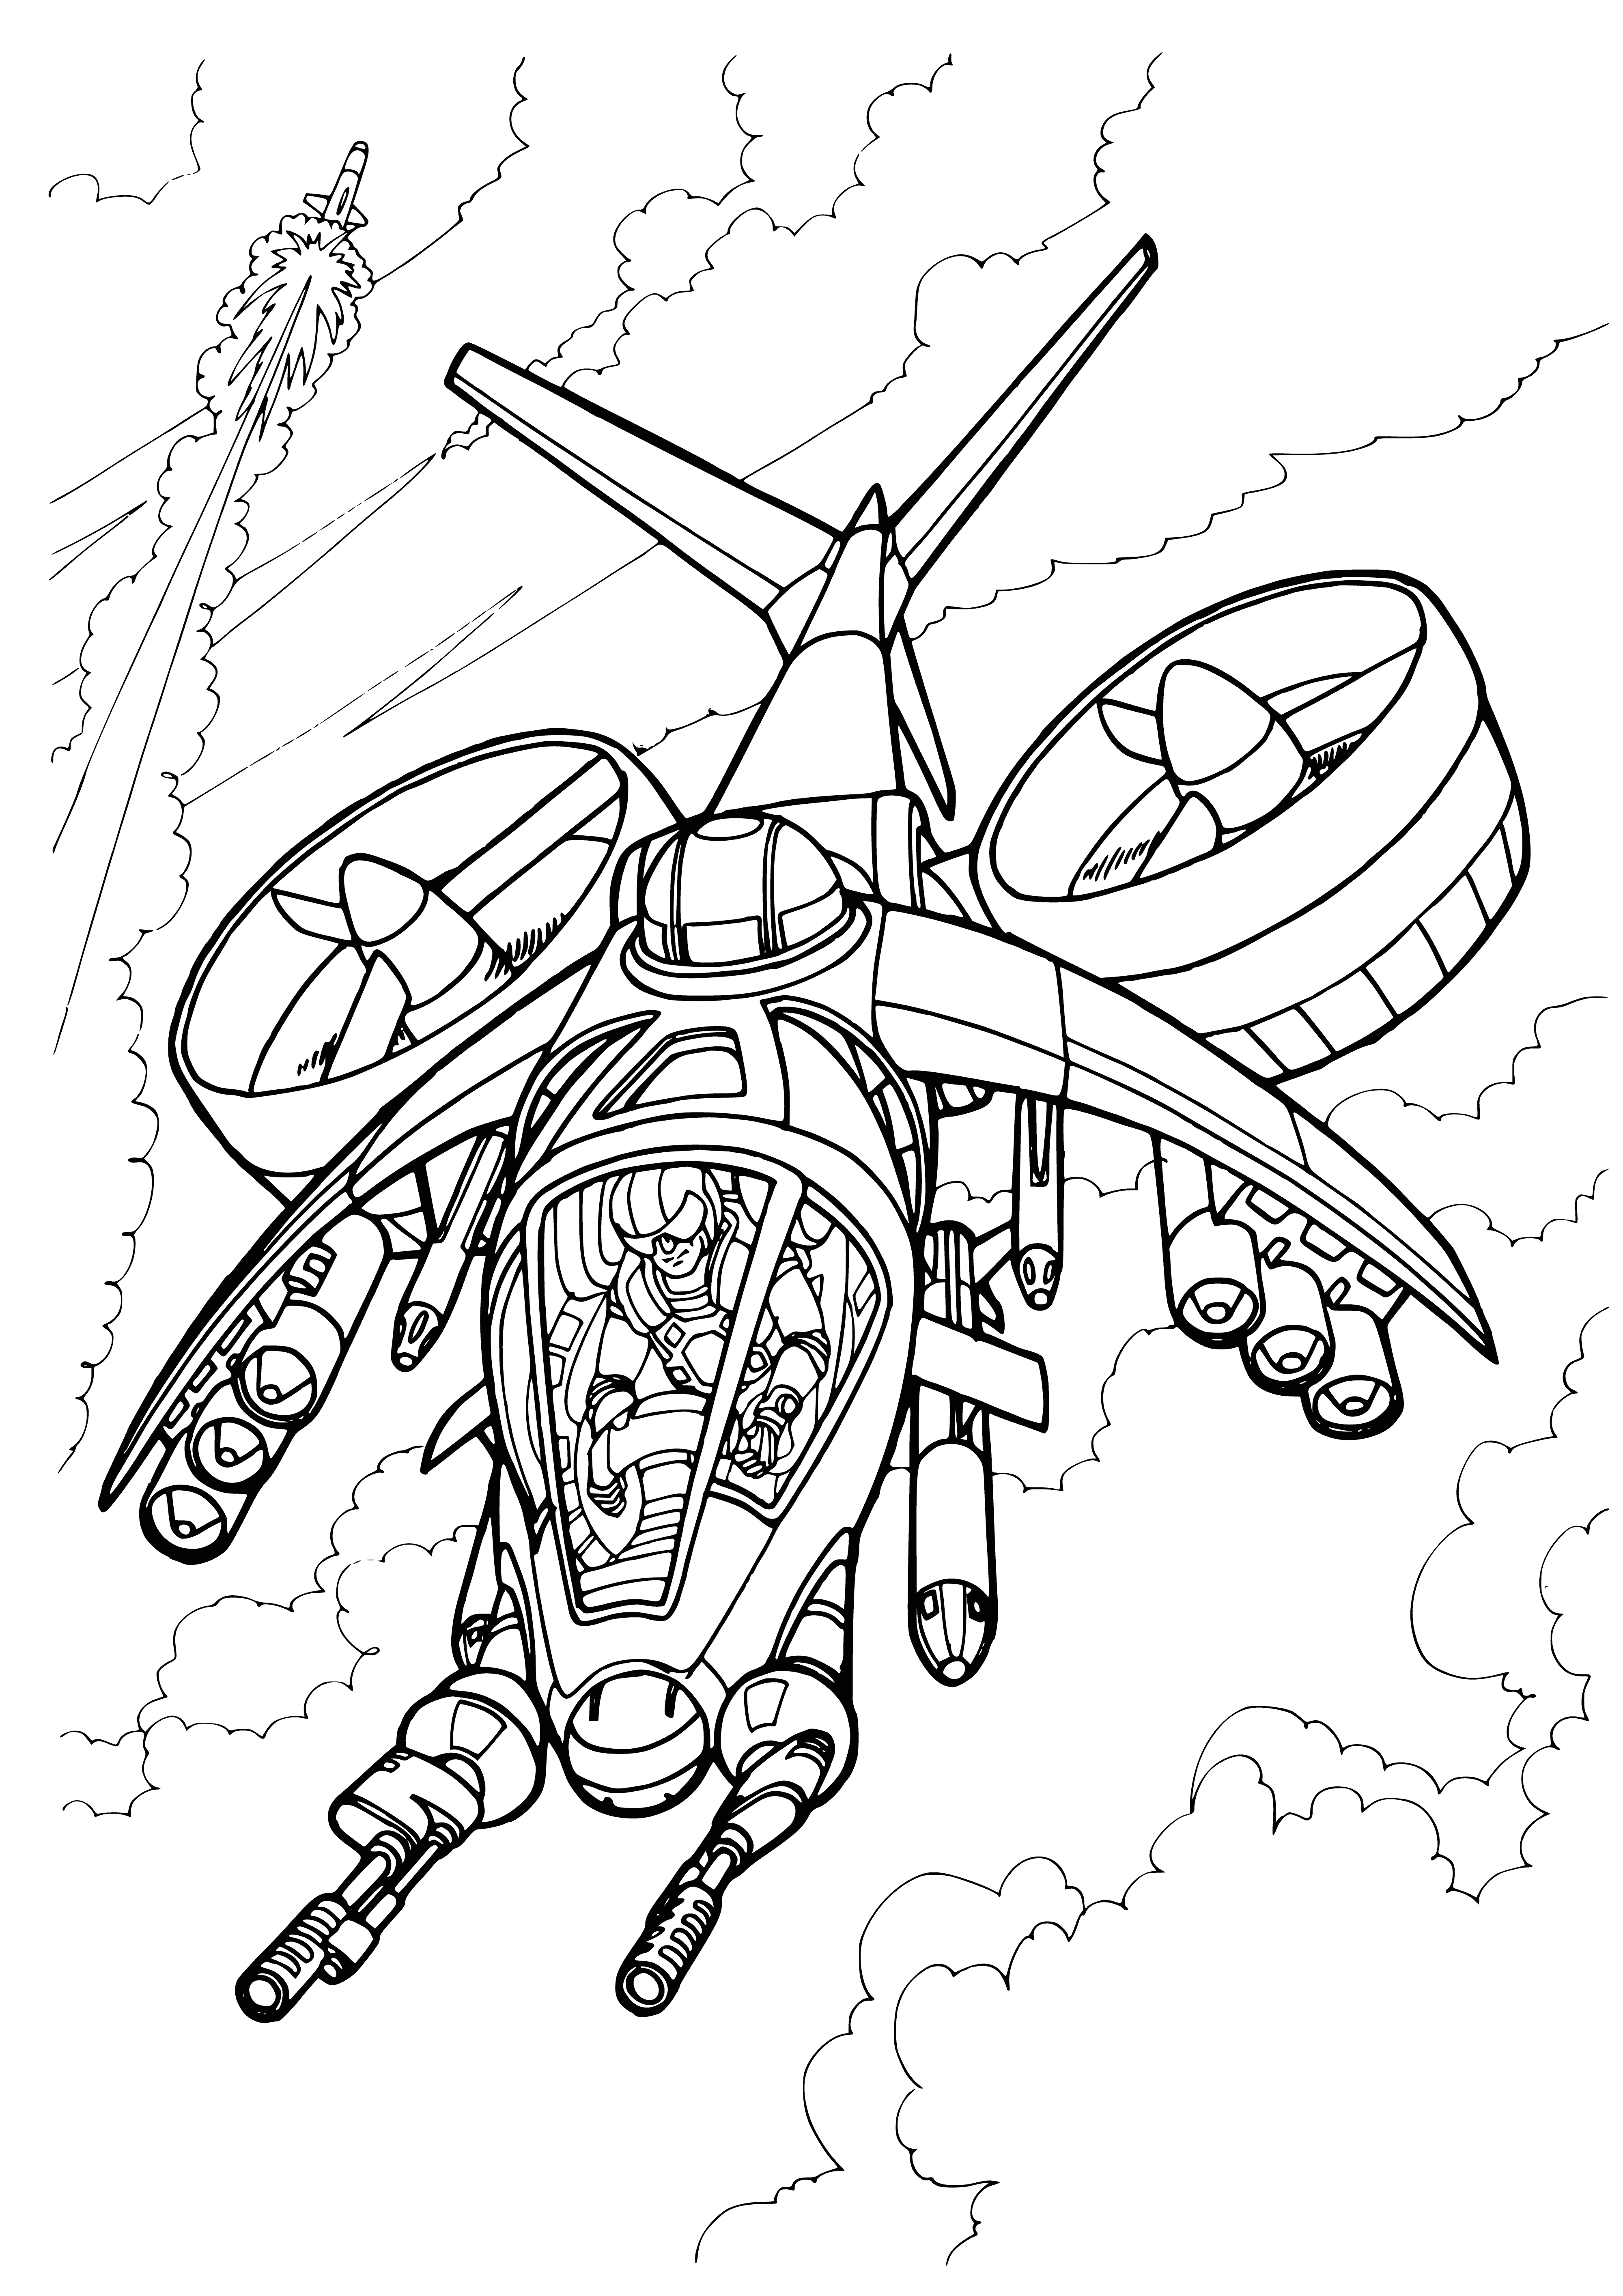 coloring page: Military rotorcraft engage in chaotic battle, skies are filled with smoke and debris, craft fire missiles in heated conflict.